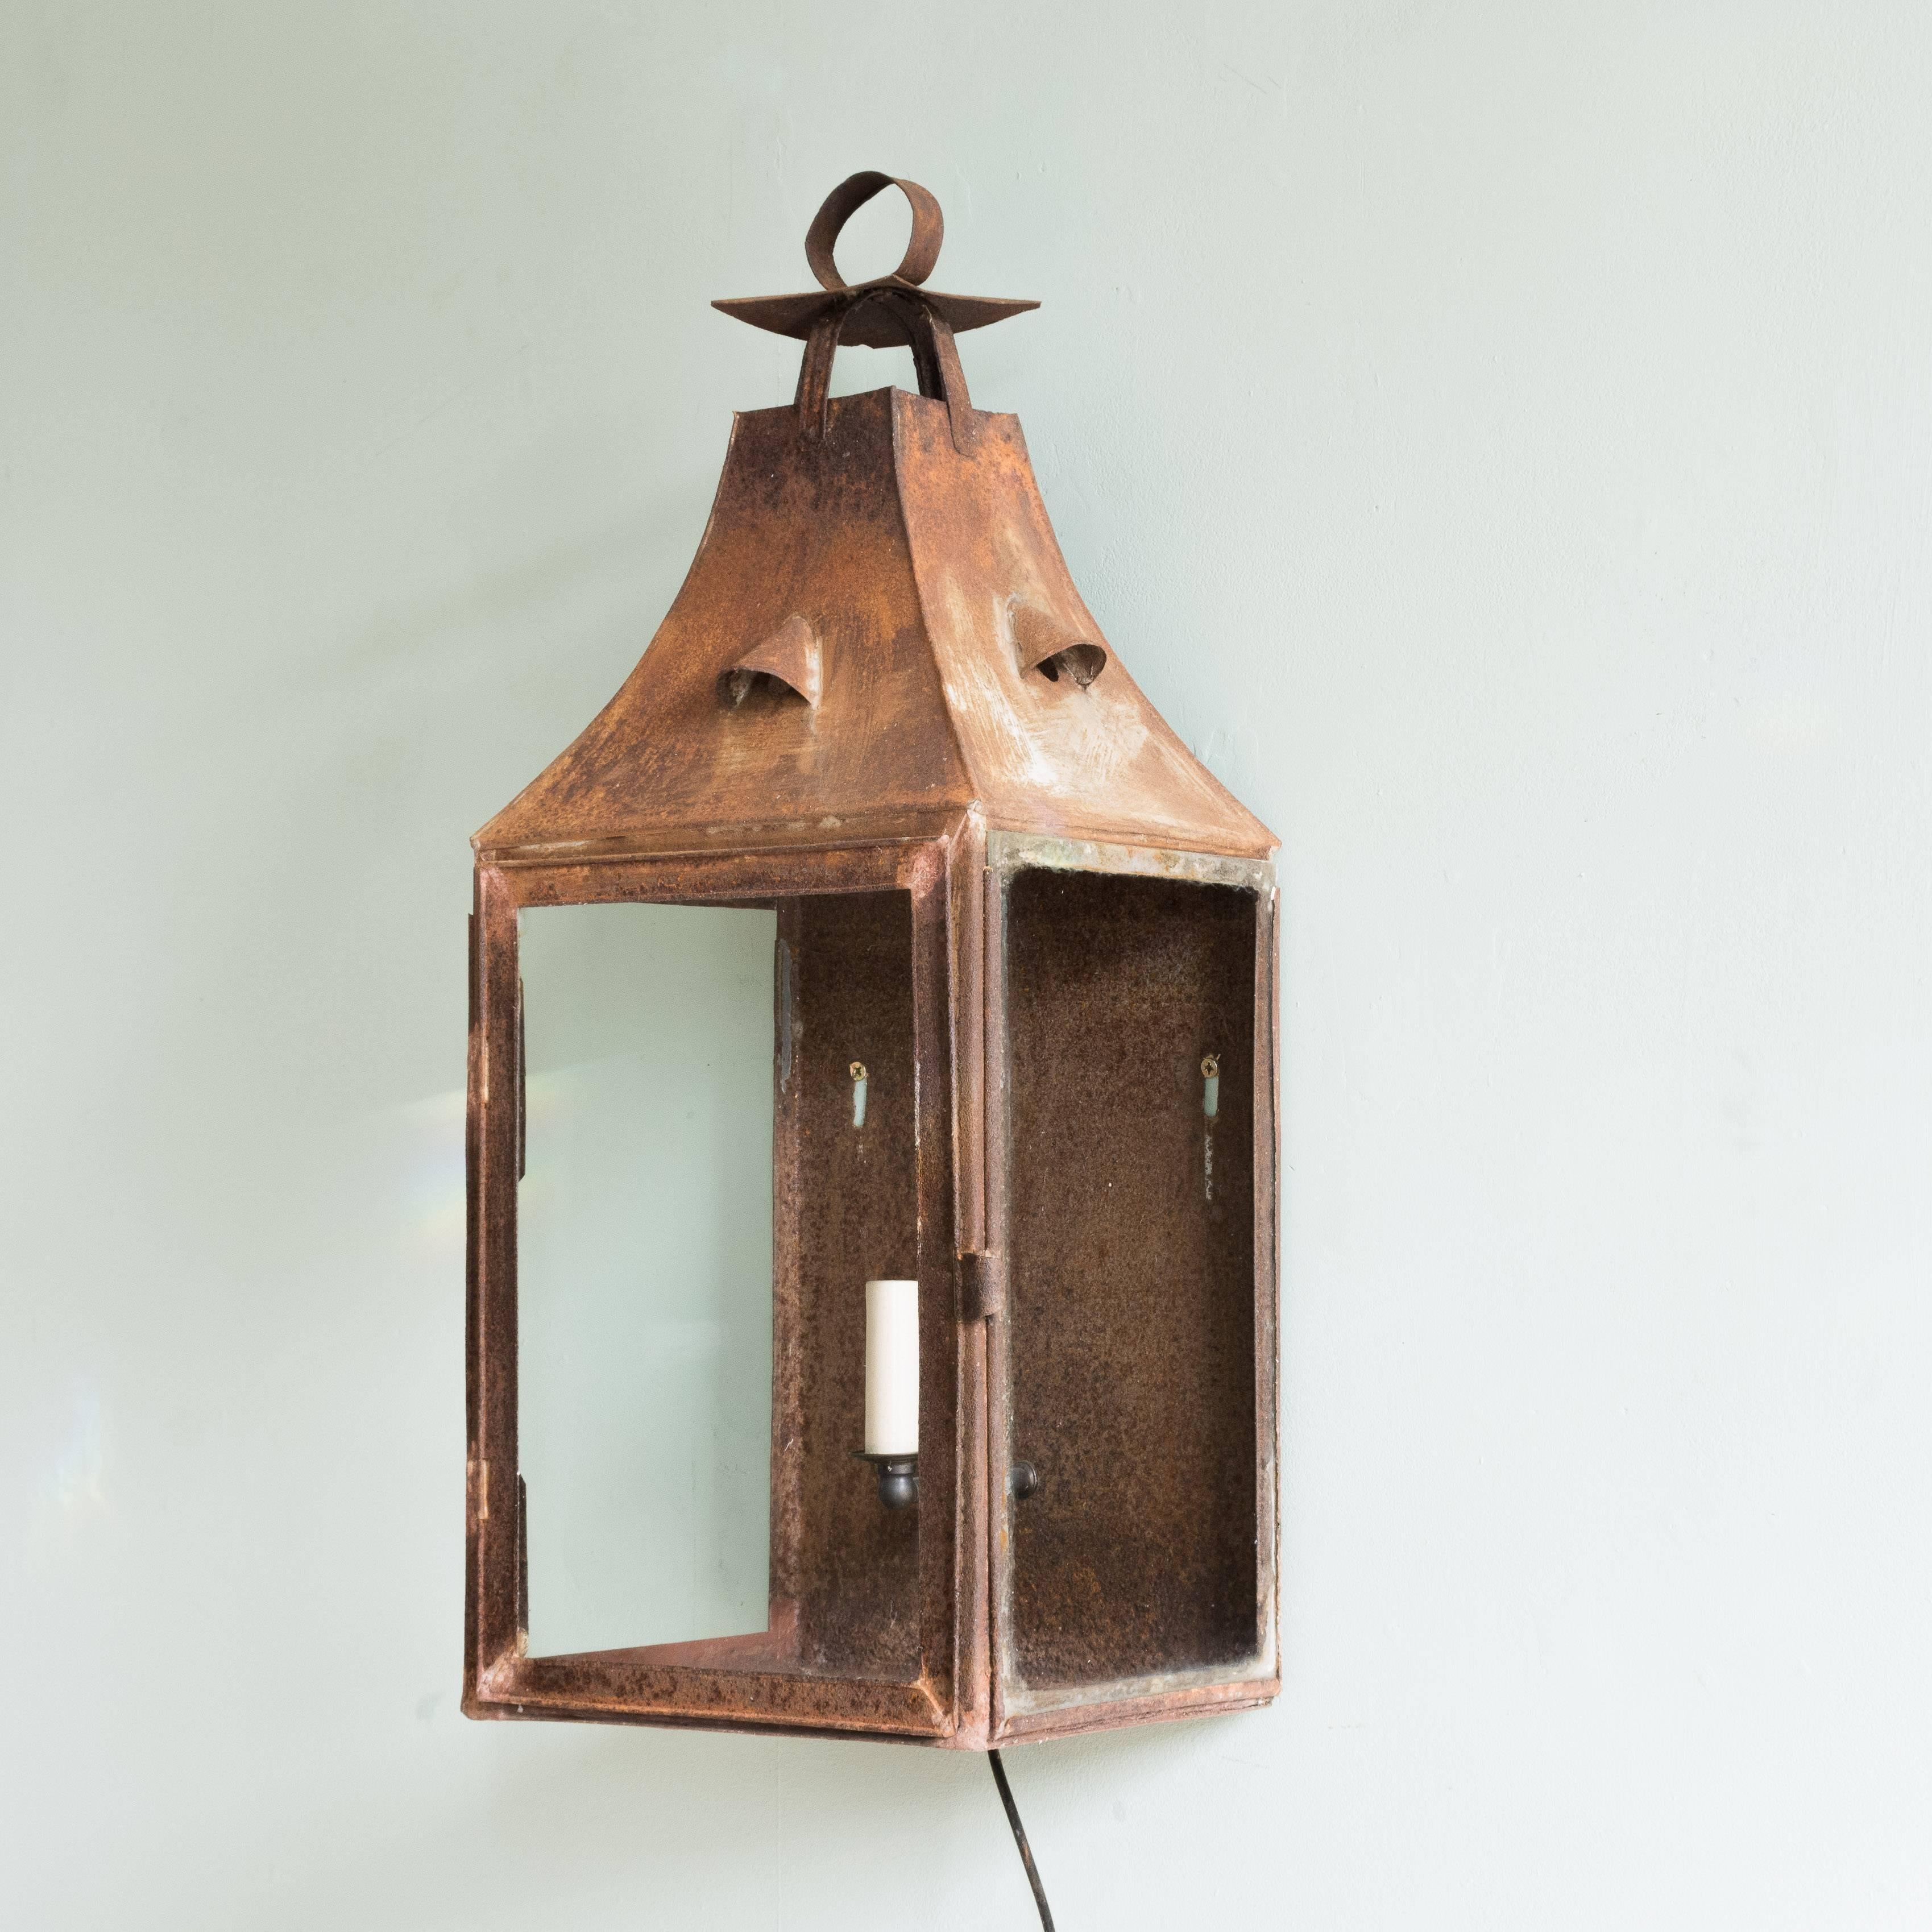 French 19th century wall lantern, the steel body with pagoda top and three-quarter glazed body enclosing rear mounted single light fitting.